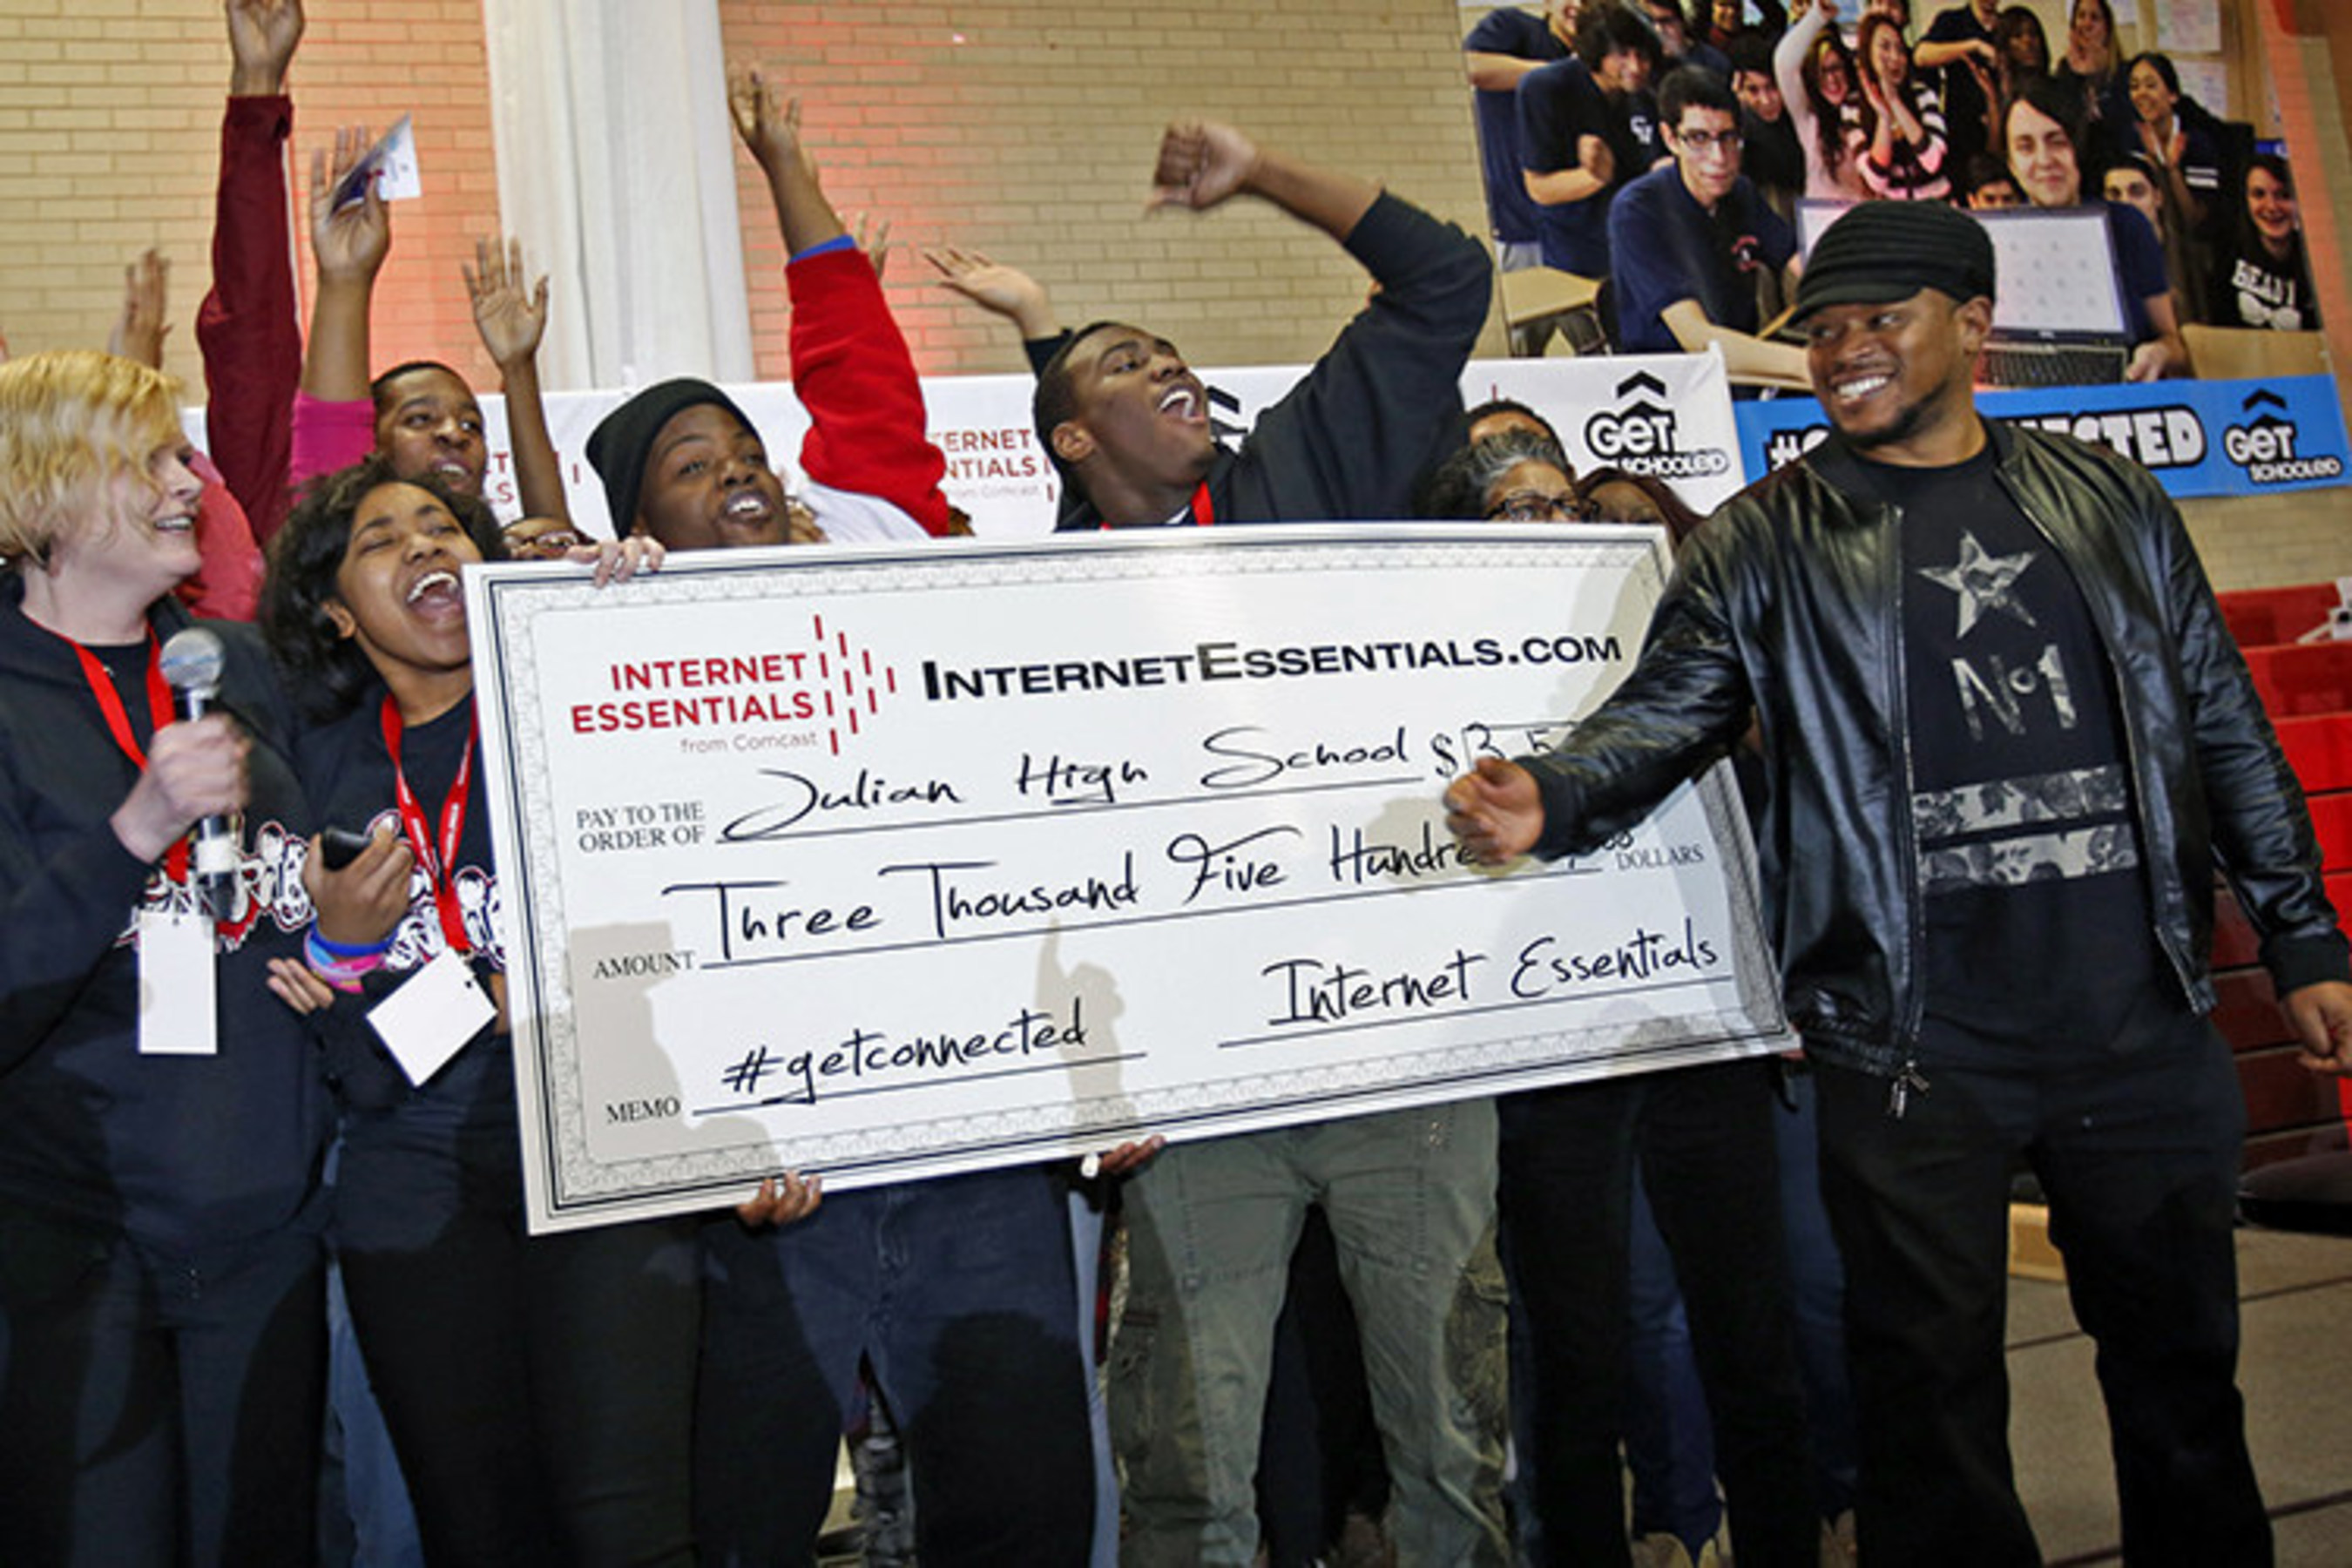 Sway Calloway from MTV presents a check to Julian High School during the Get Schooled, #GetConnected Celebration.